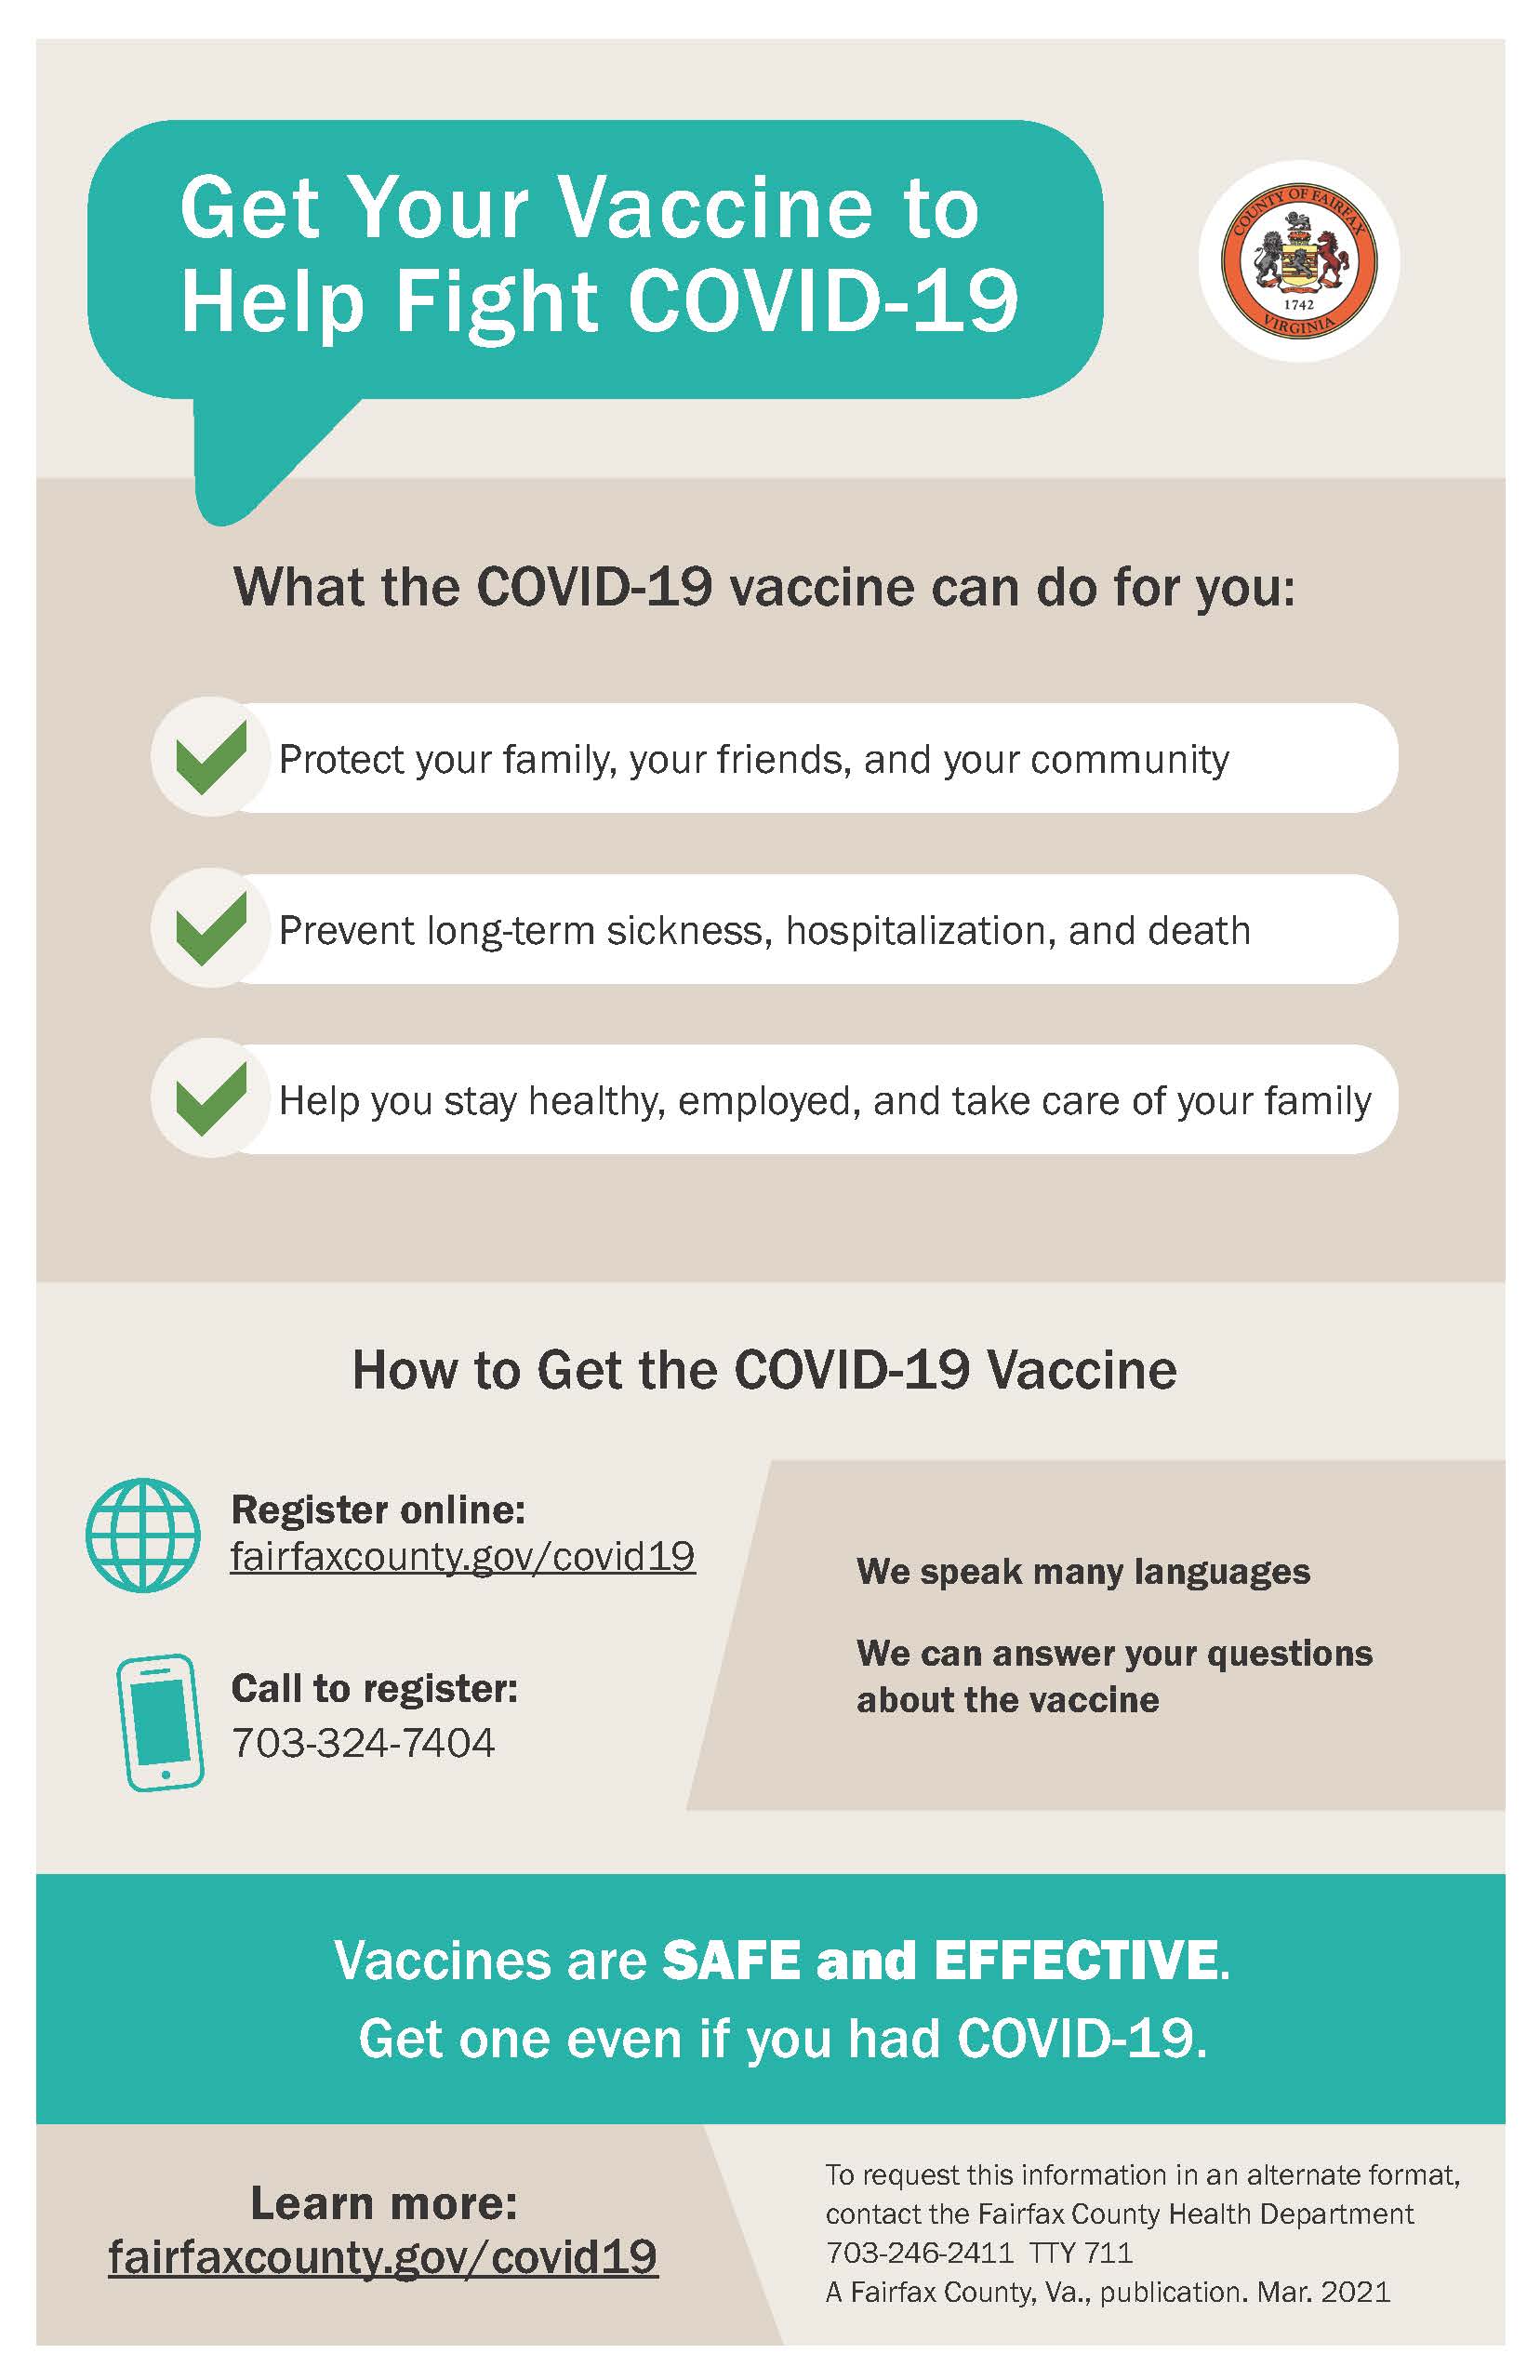 Get Your Vaccine to Help Fight COVID-19